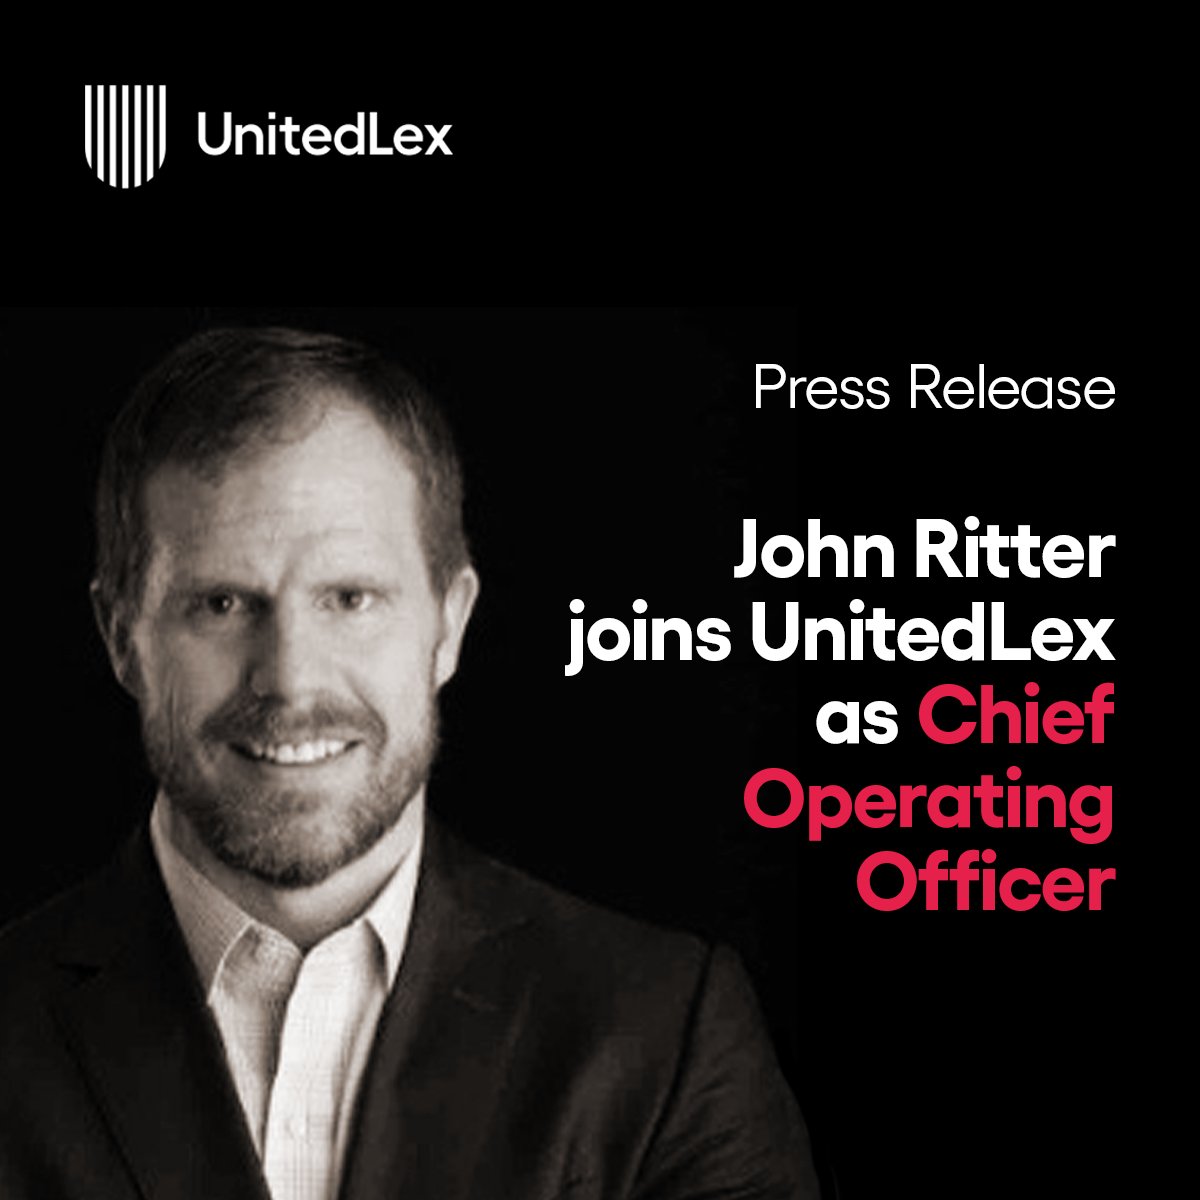 “As the company’s first Chief Operating Officer, I’m honored to join the team and to continue the UnitedLex tradition by leveraging my experience leading global operations and my legal background.” hubs.ly/Q02qQHBB0